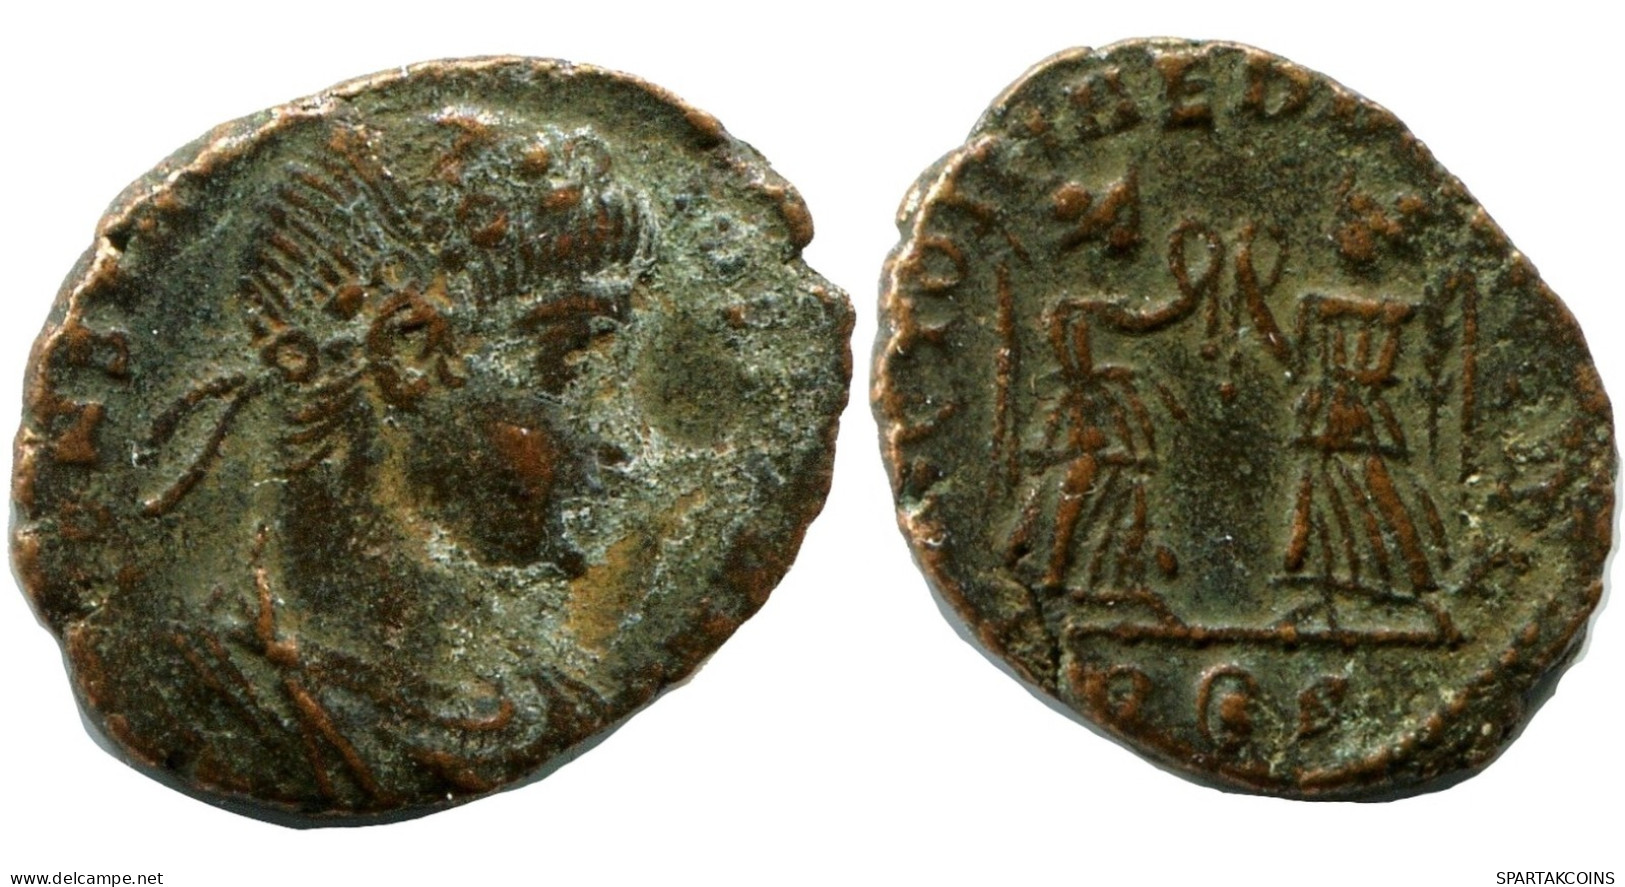 CONSTANS MINTED IN ROME ITALY FROM THE ROYAL ONTARIO MUSEUM #ANC11543.14.F.A - The Christian Empire (307 AD Tot 363 AD)